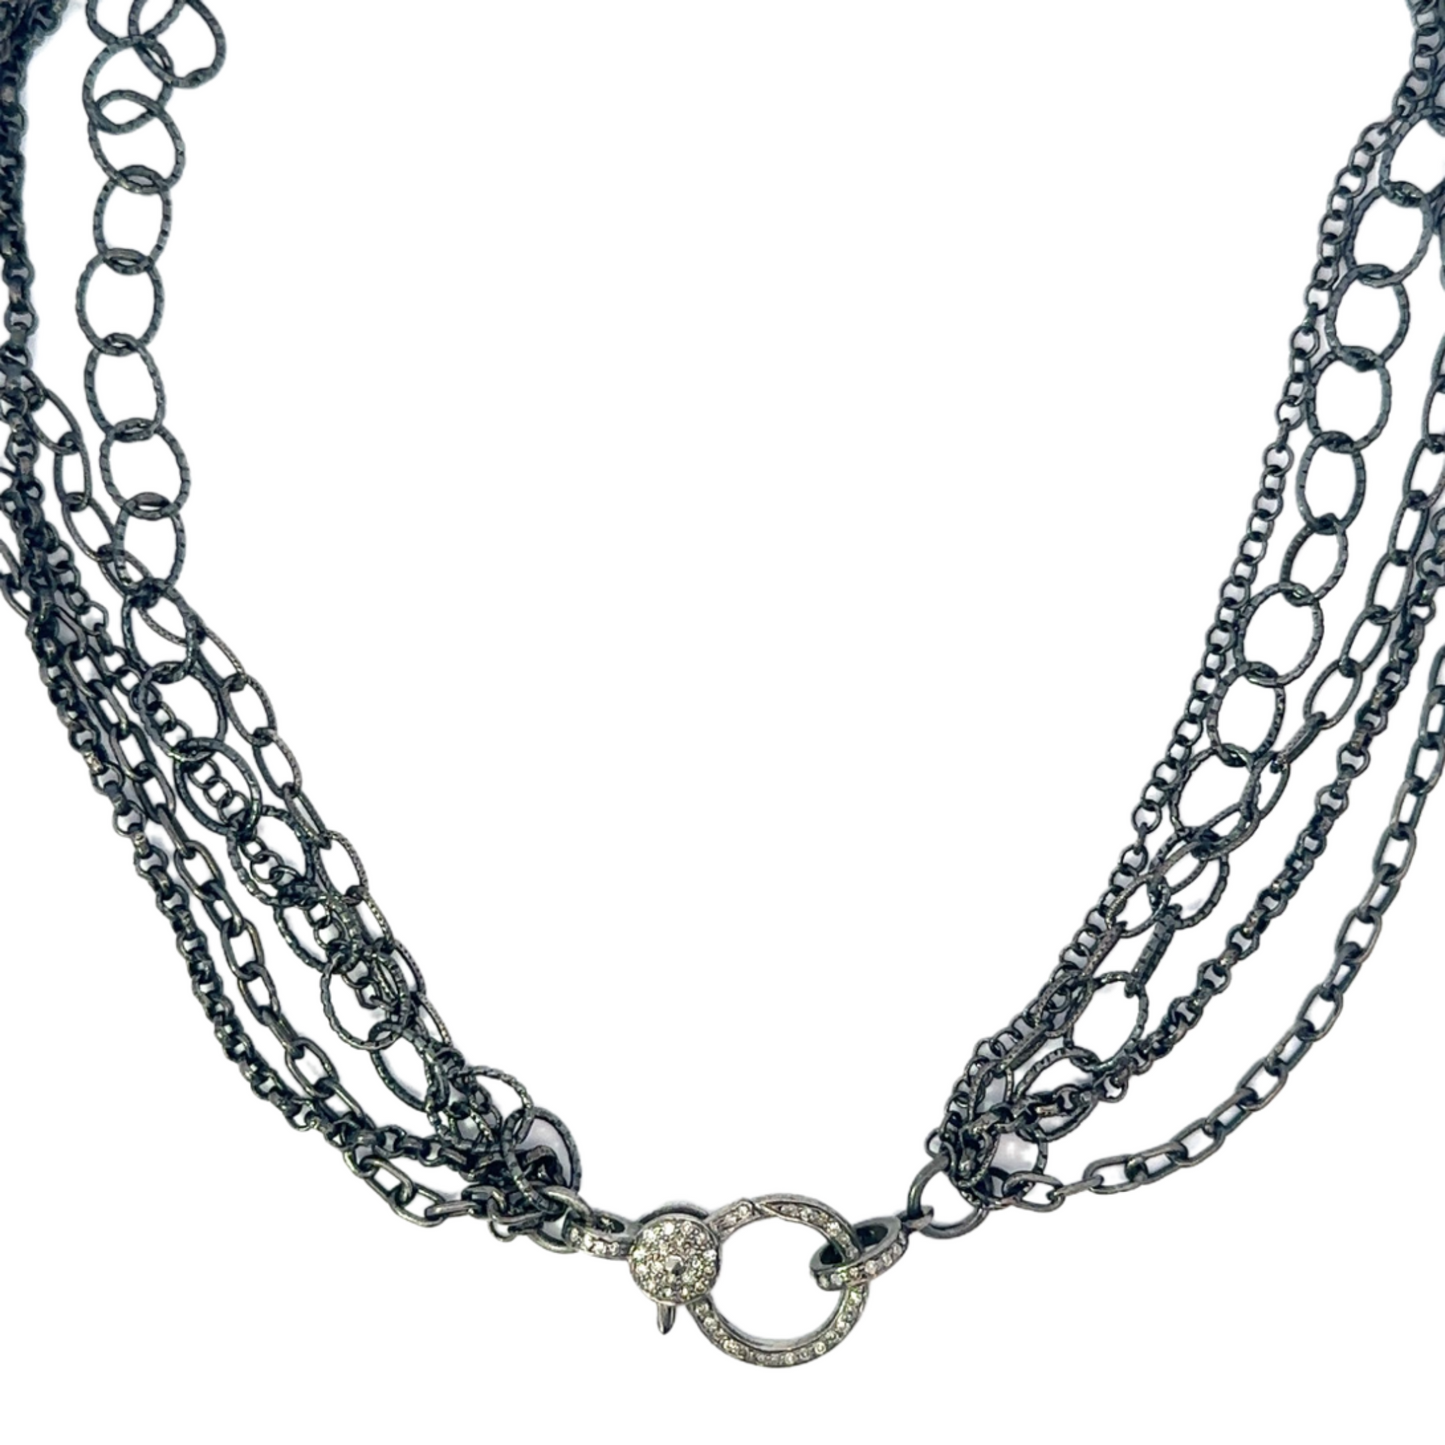 Multi Chain Necklace with Pave Diamond Lobster